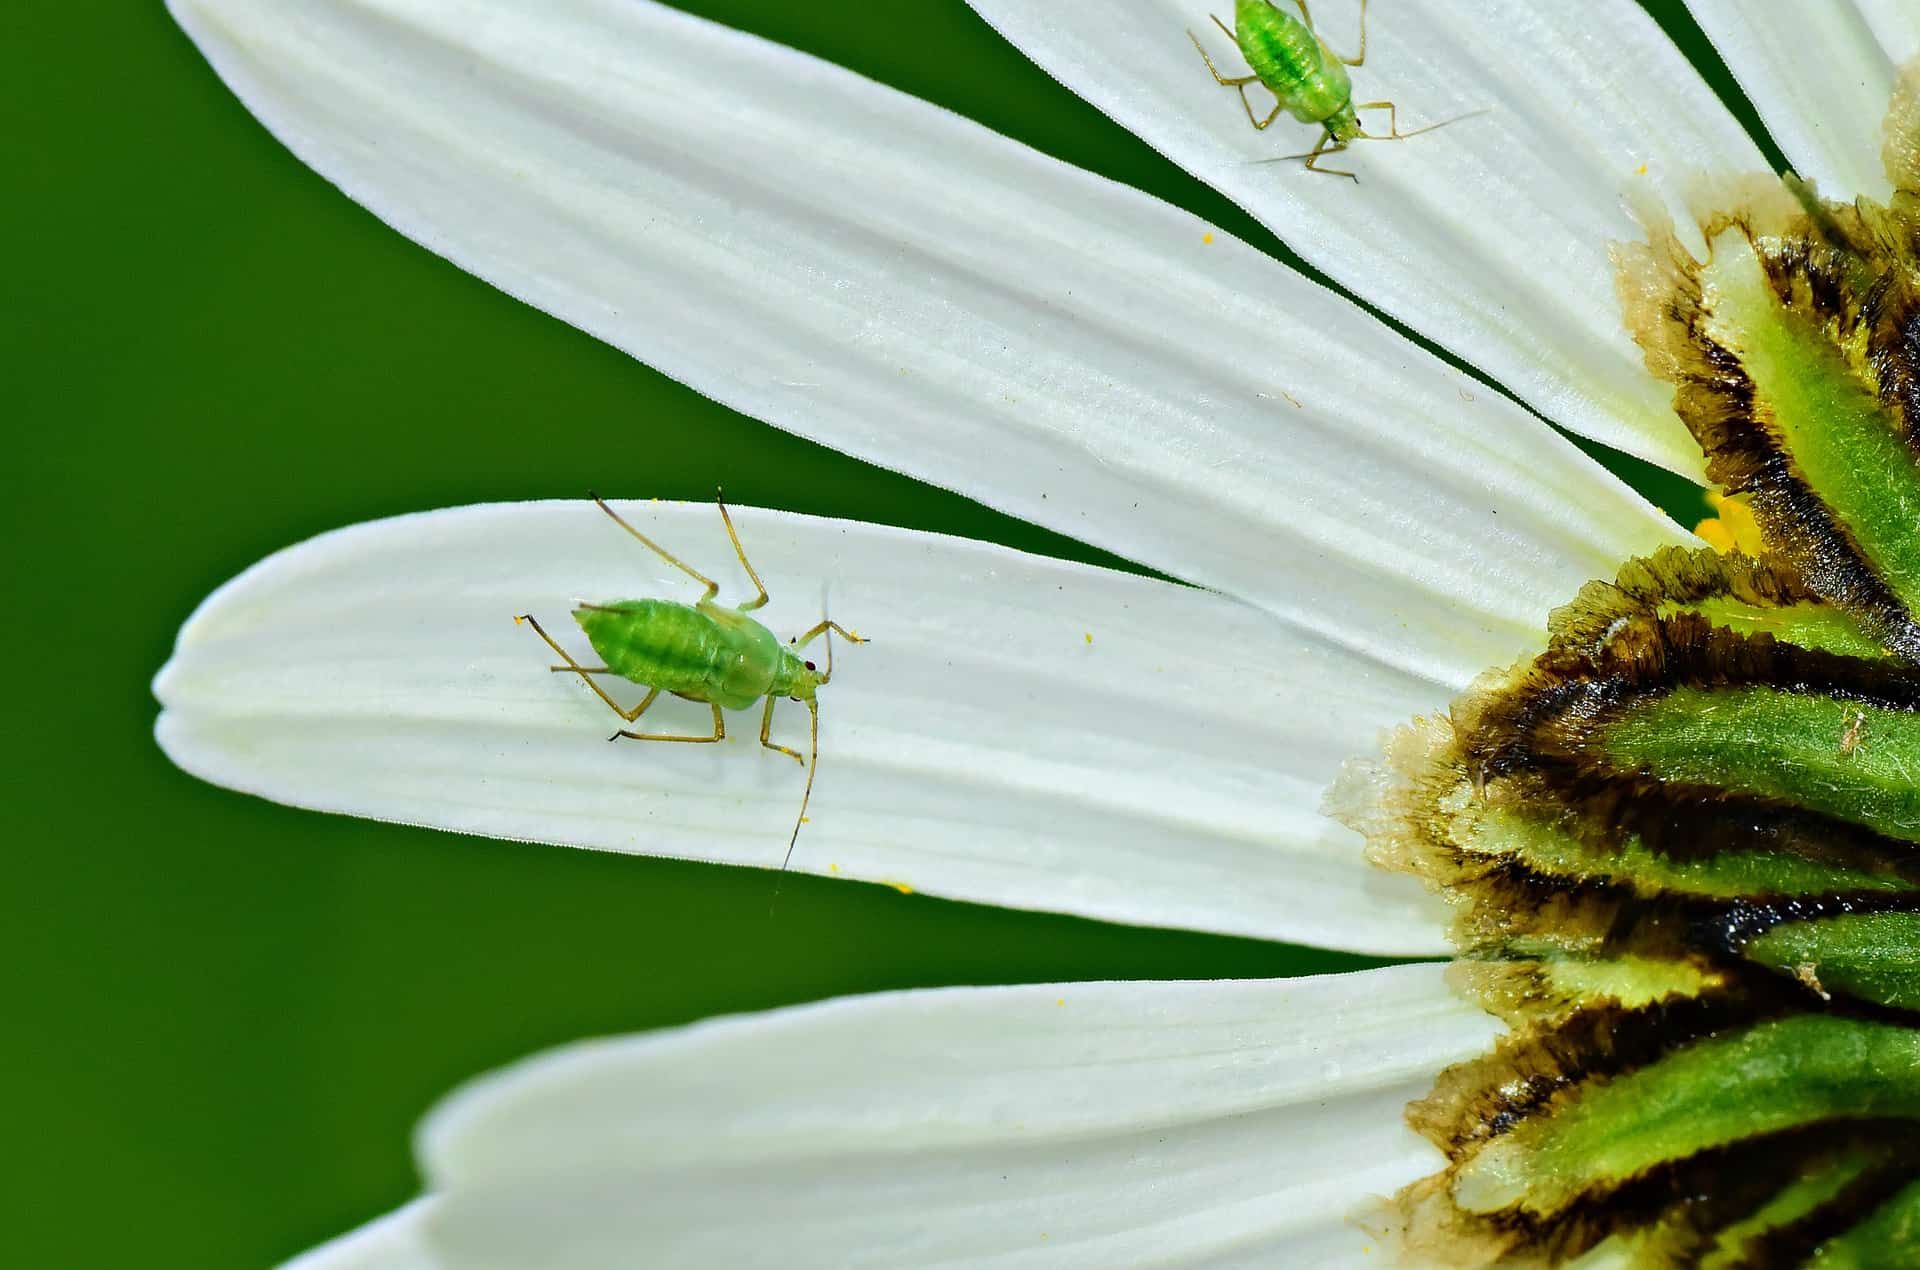 Aphids on a daisy